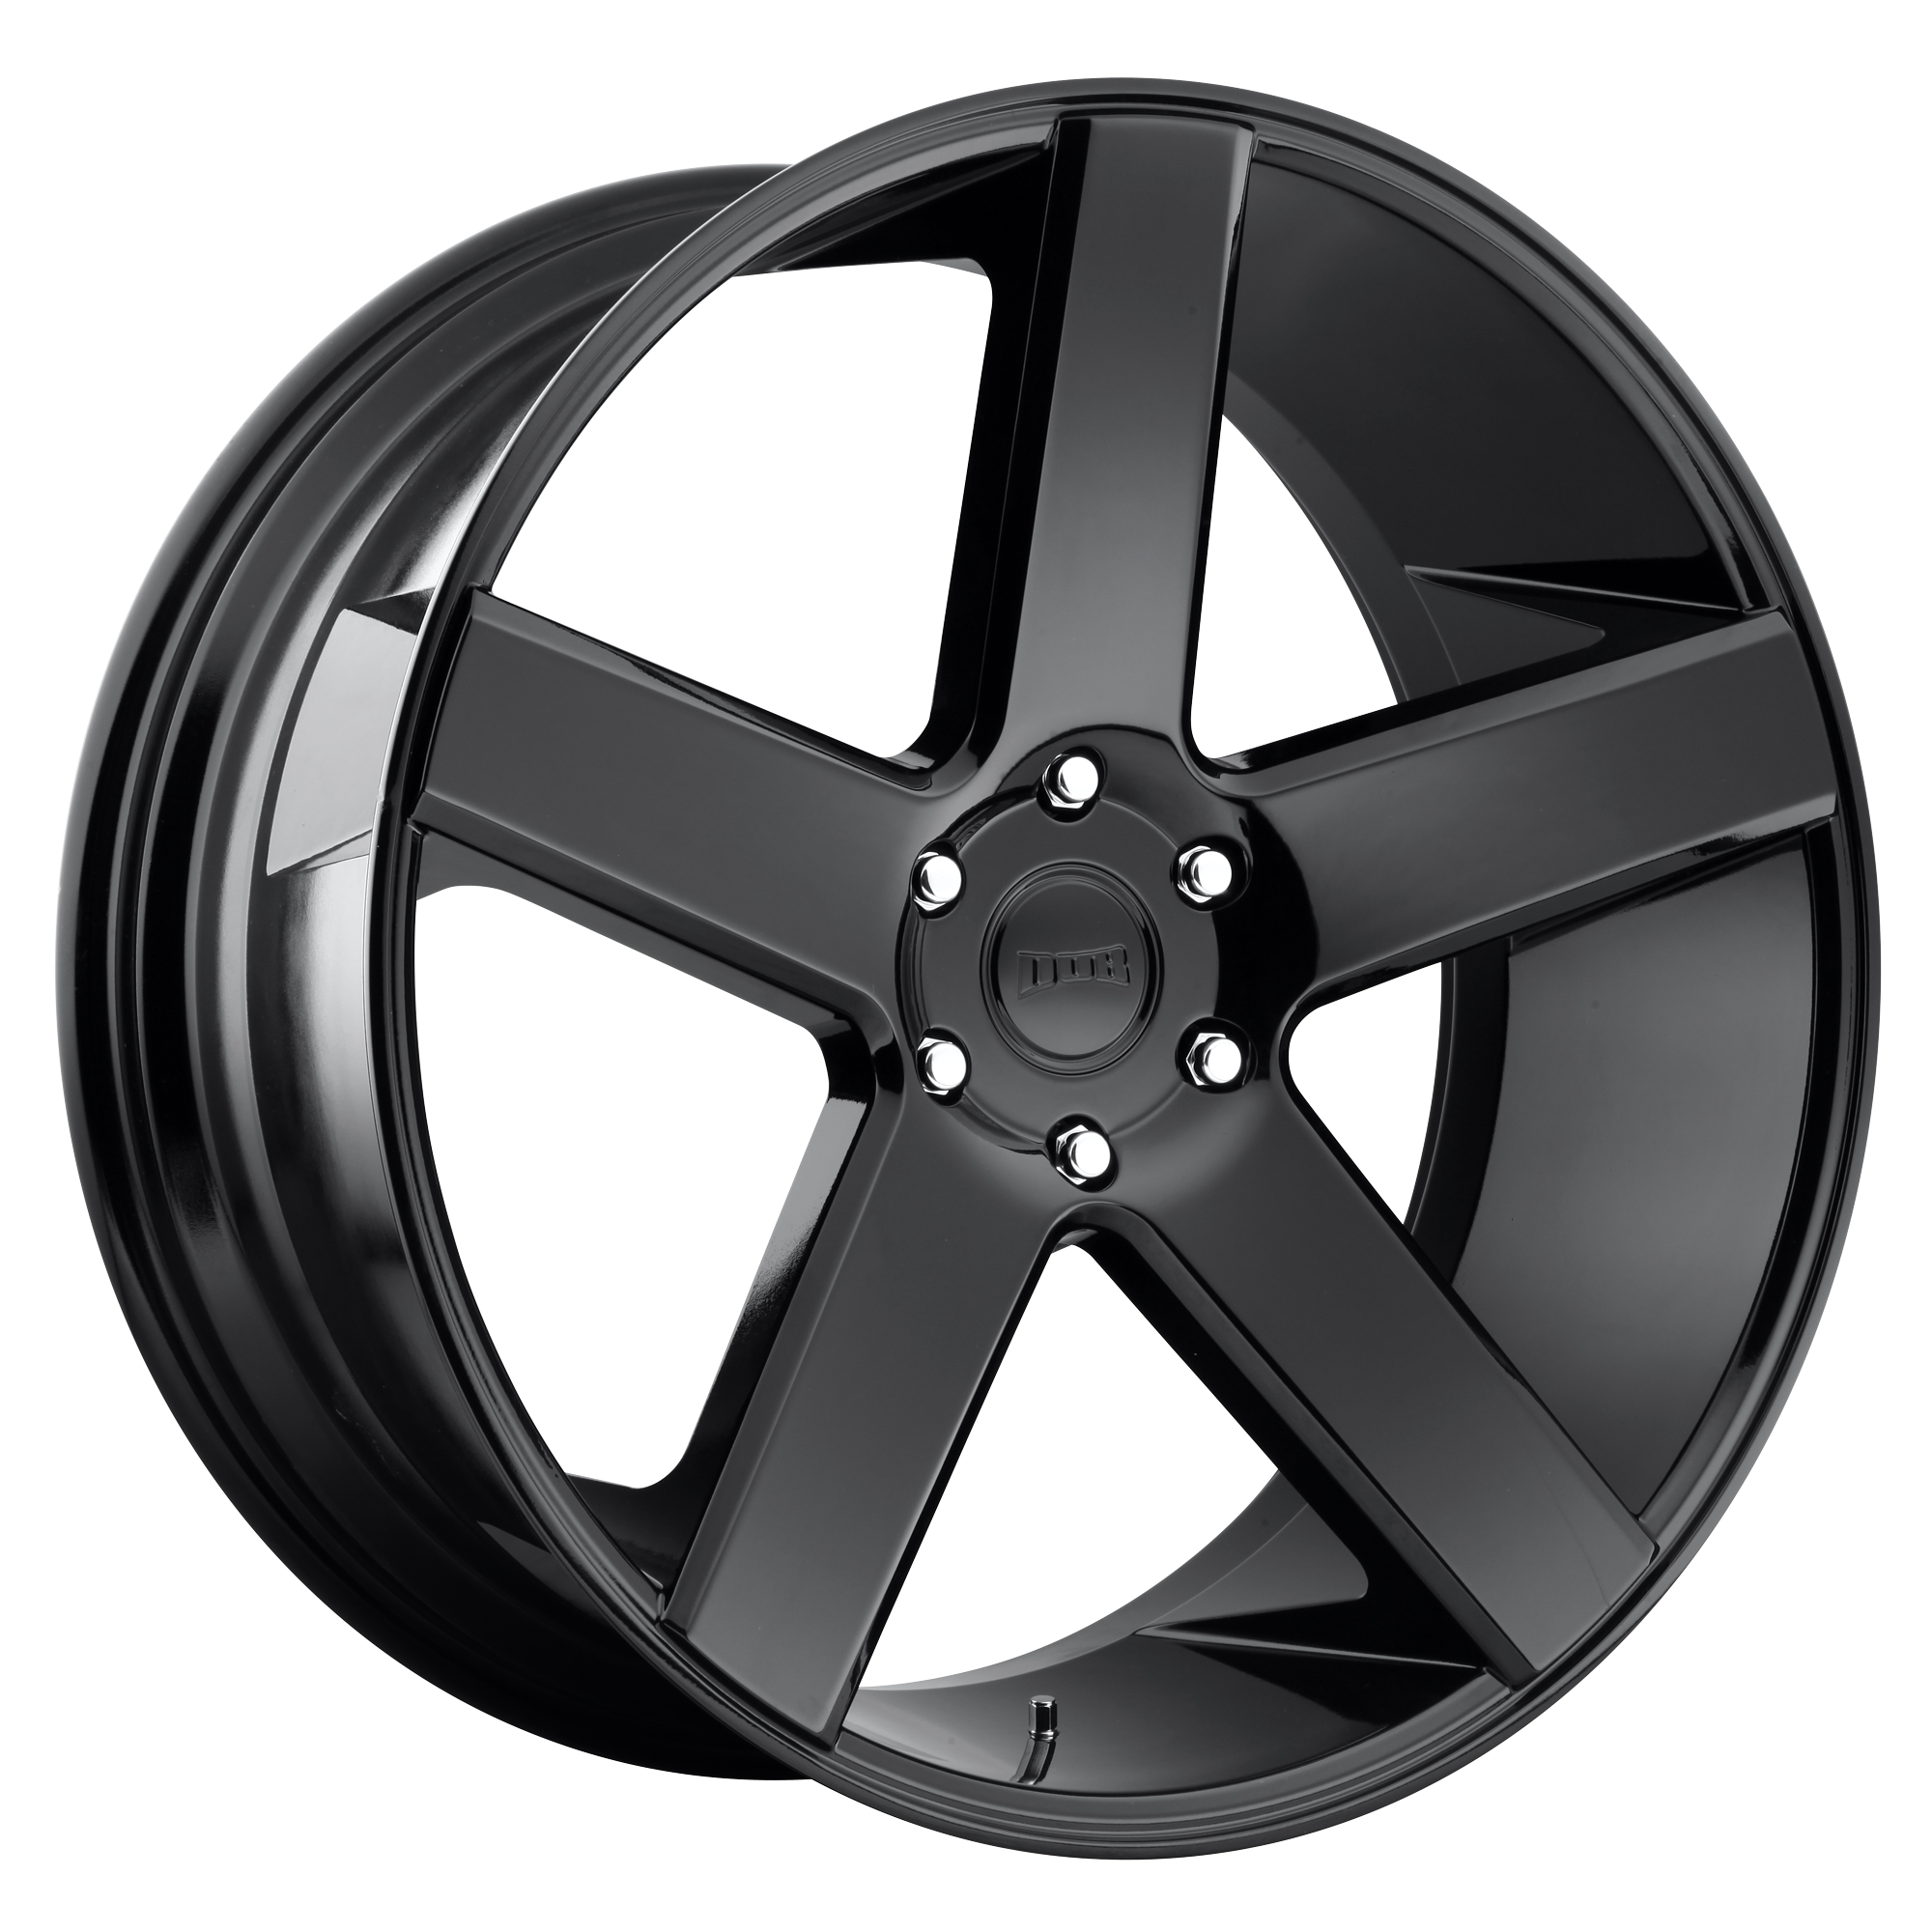 BALLER 20x9.5 6x139.70 GLOSS BLACK (30 mm) - Tires and Engine Performance